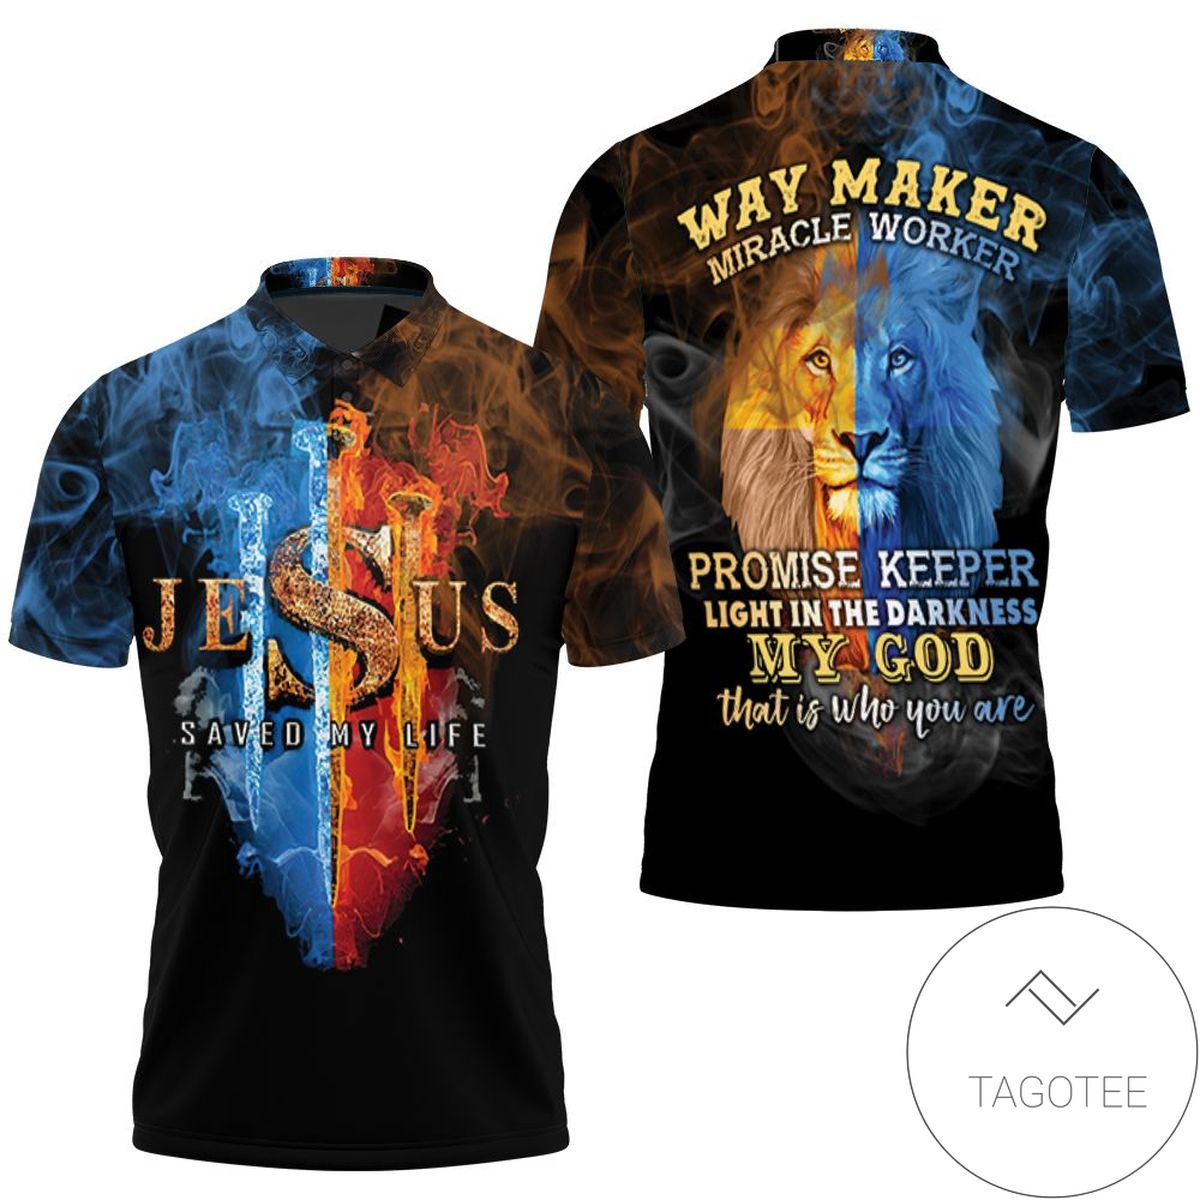 Jesus Save My Life Way Maker Miracle Worker Promi All Over Print Polo Shirt